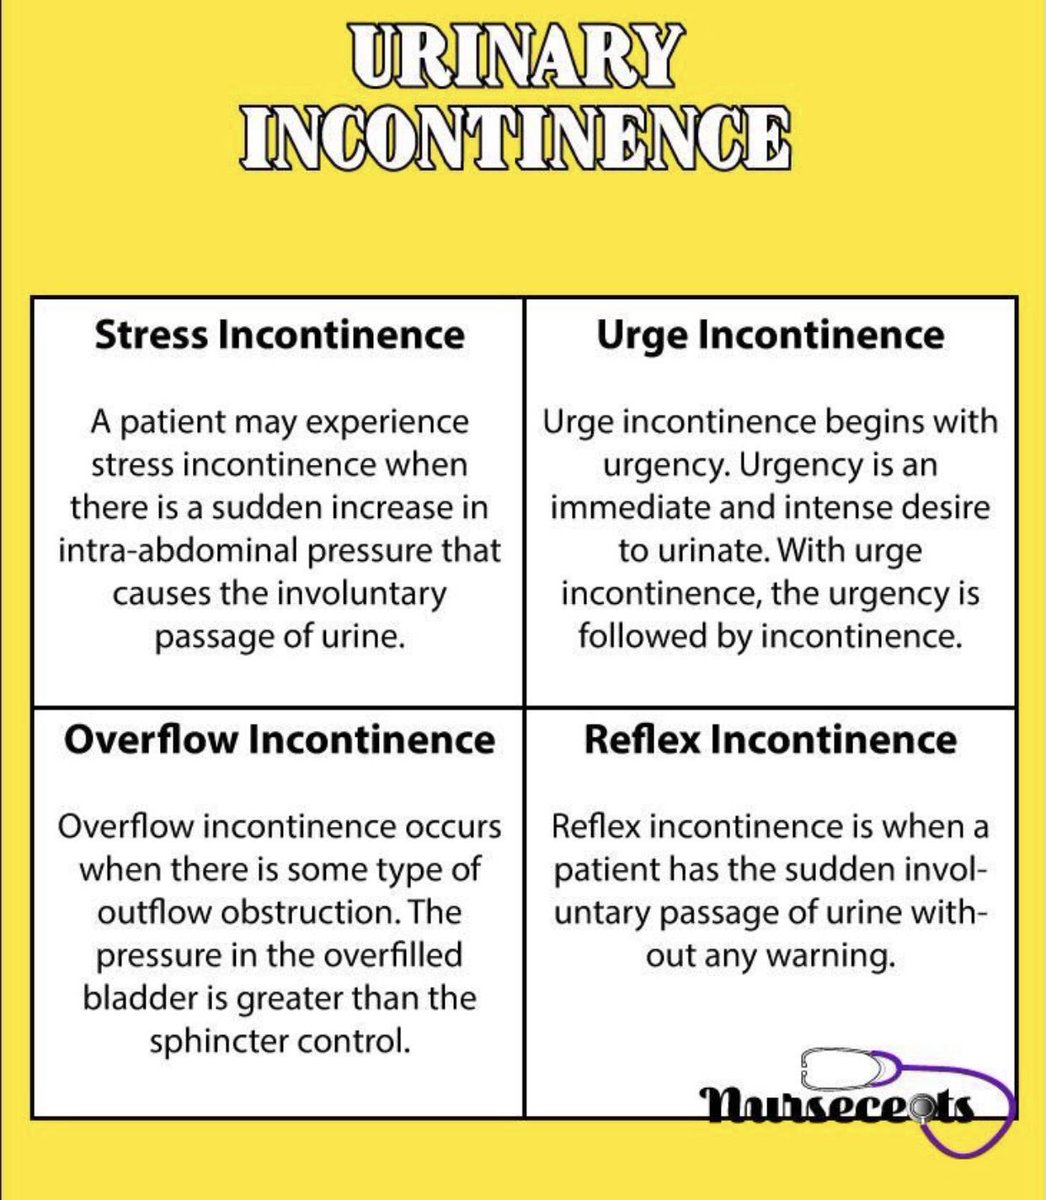 Urinary incontinence ✨

Table that shows the different types and their treatment (according to rosh review!) 😍👌🏼

-